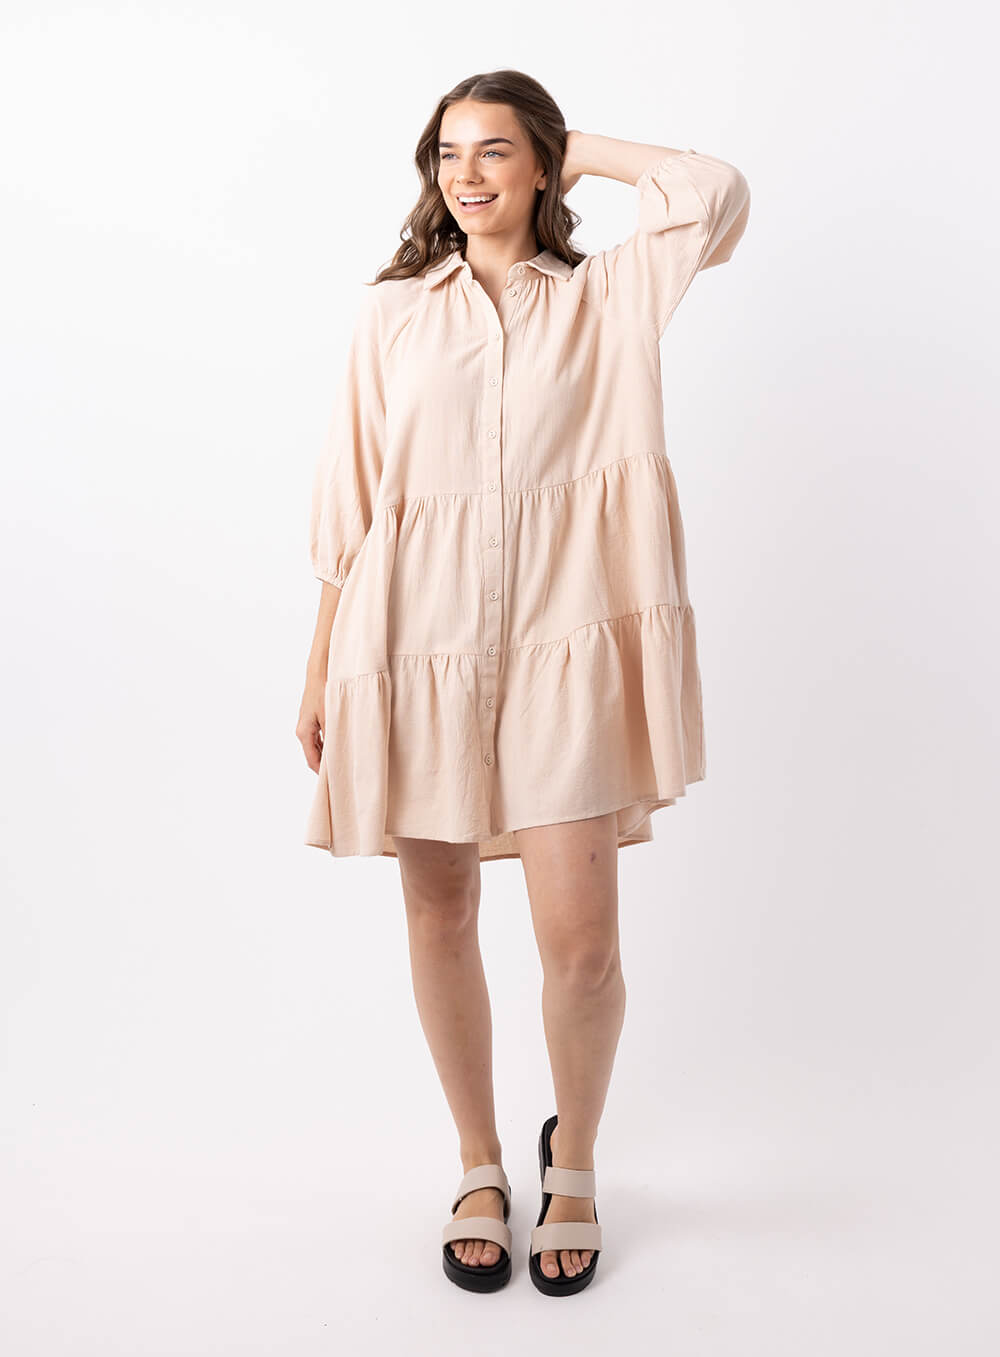 The Jasmine Dress in beige is made of 100% soft cotton, featuring a collar neck, 3/4 sleeve with elastic cuff button through front all the way to the hem, tiered layers through the body, midi in length and 2 side pockets